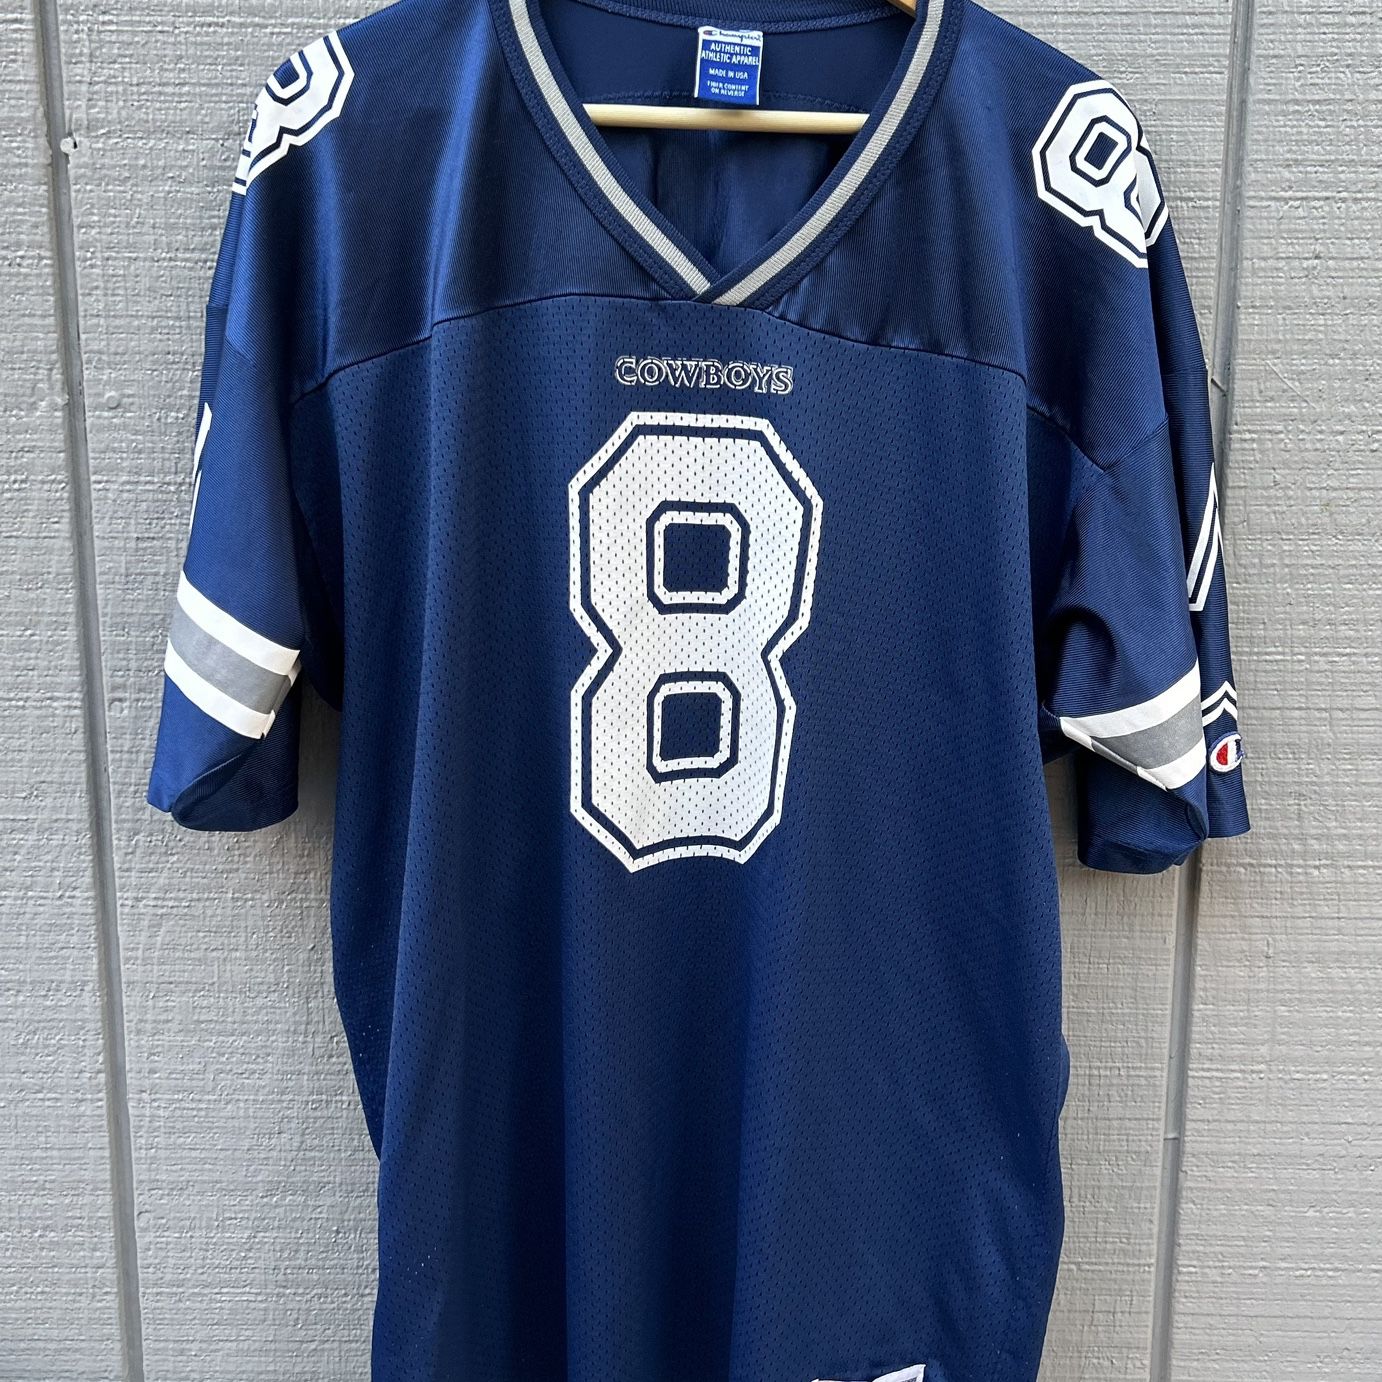 Dallas Cowboys Troy Aikman #8 Authentic White Jersey Champion NWT 44 620